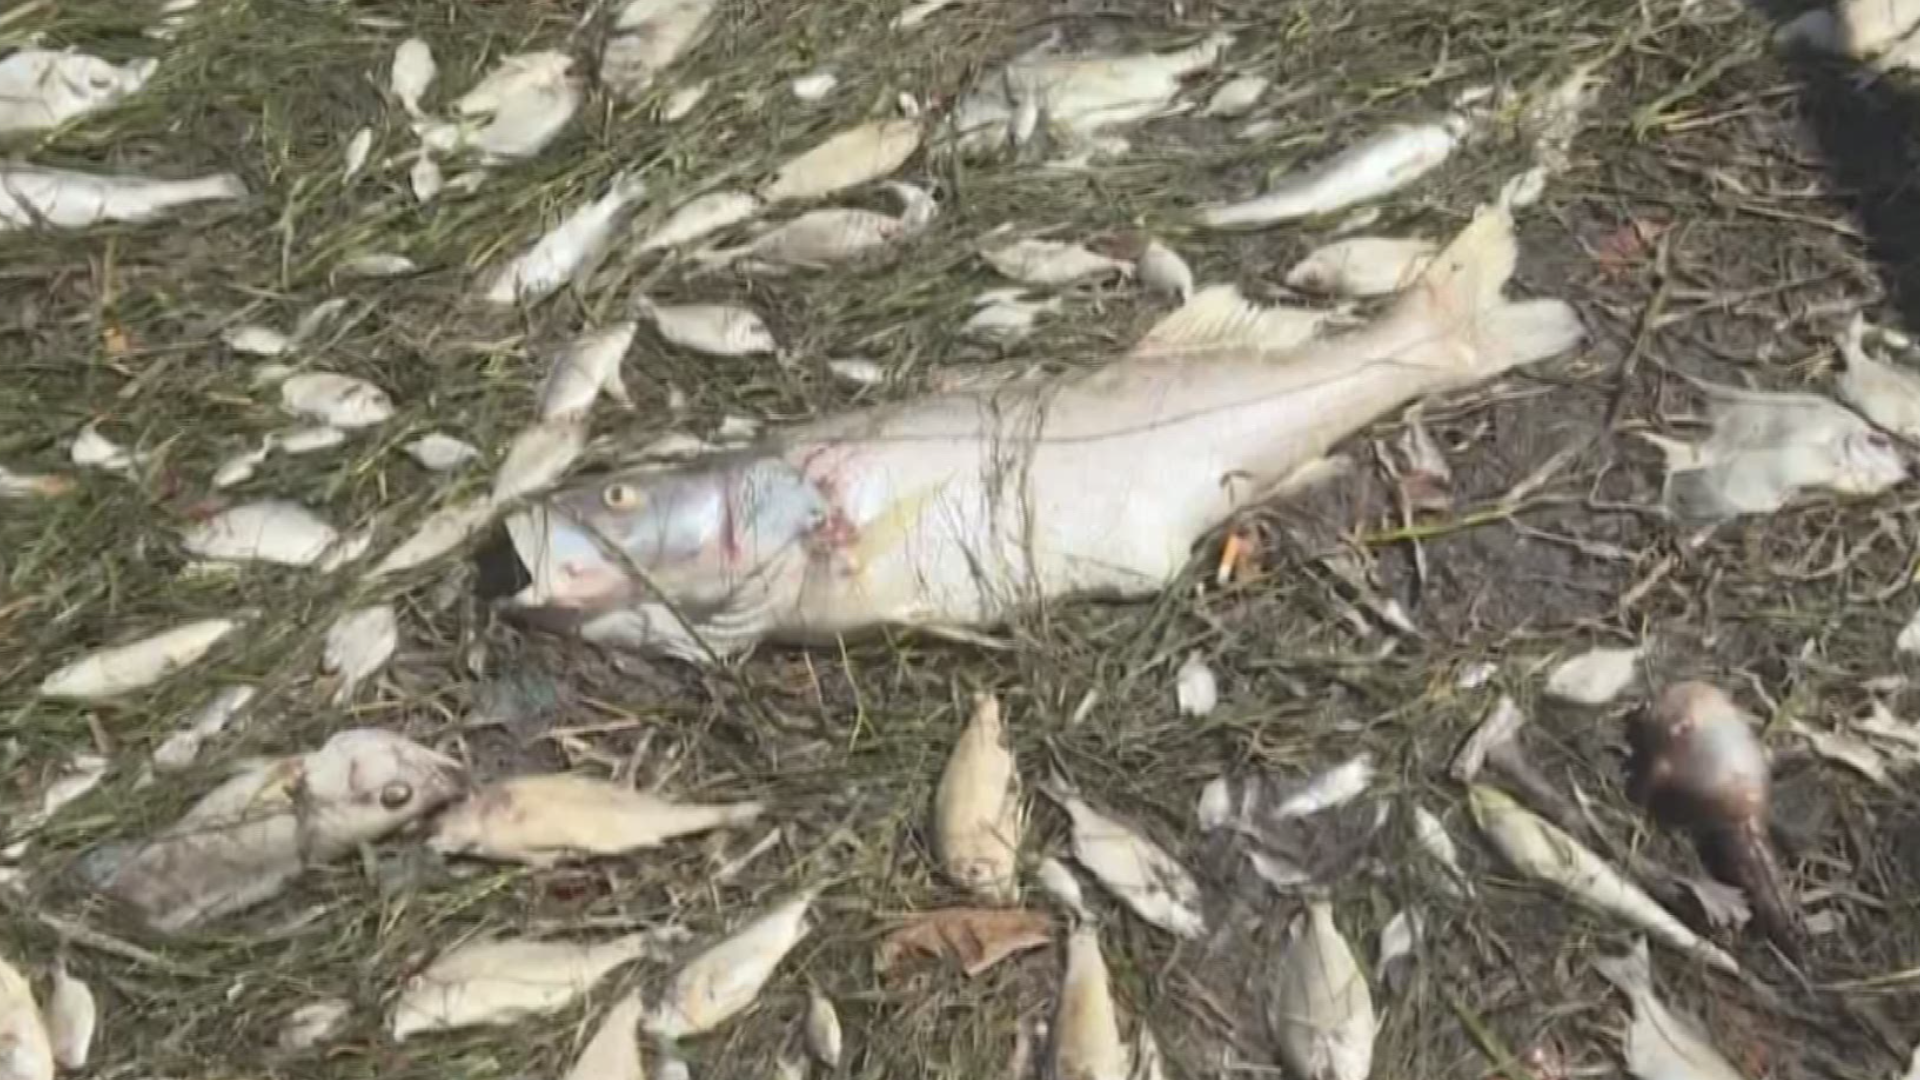 The dead fish, dolphins and the nasty smell of murky water all came with the red tide that plagued Florida’s Gulf coast last summer.

Mote Marine Laboratory in Sarasota is working to make a spray they believe could reduce the toxins red tide releases.

While researchers are still working on a finding a compound that works, when they do, they say the results could be a game changer